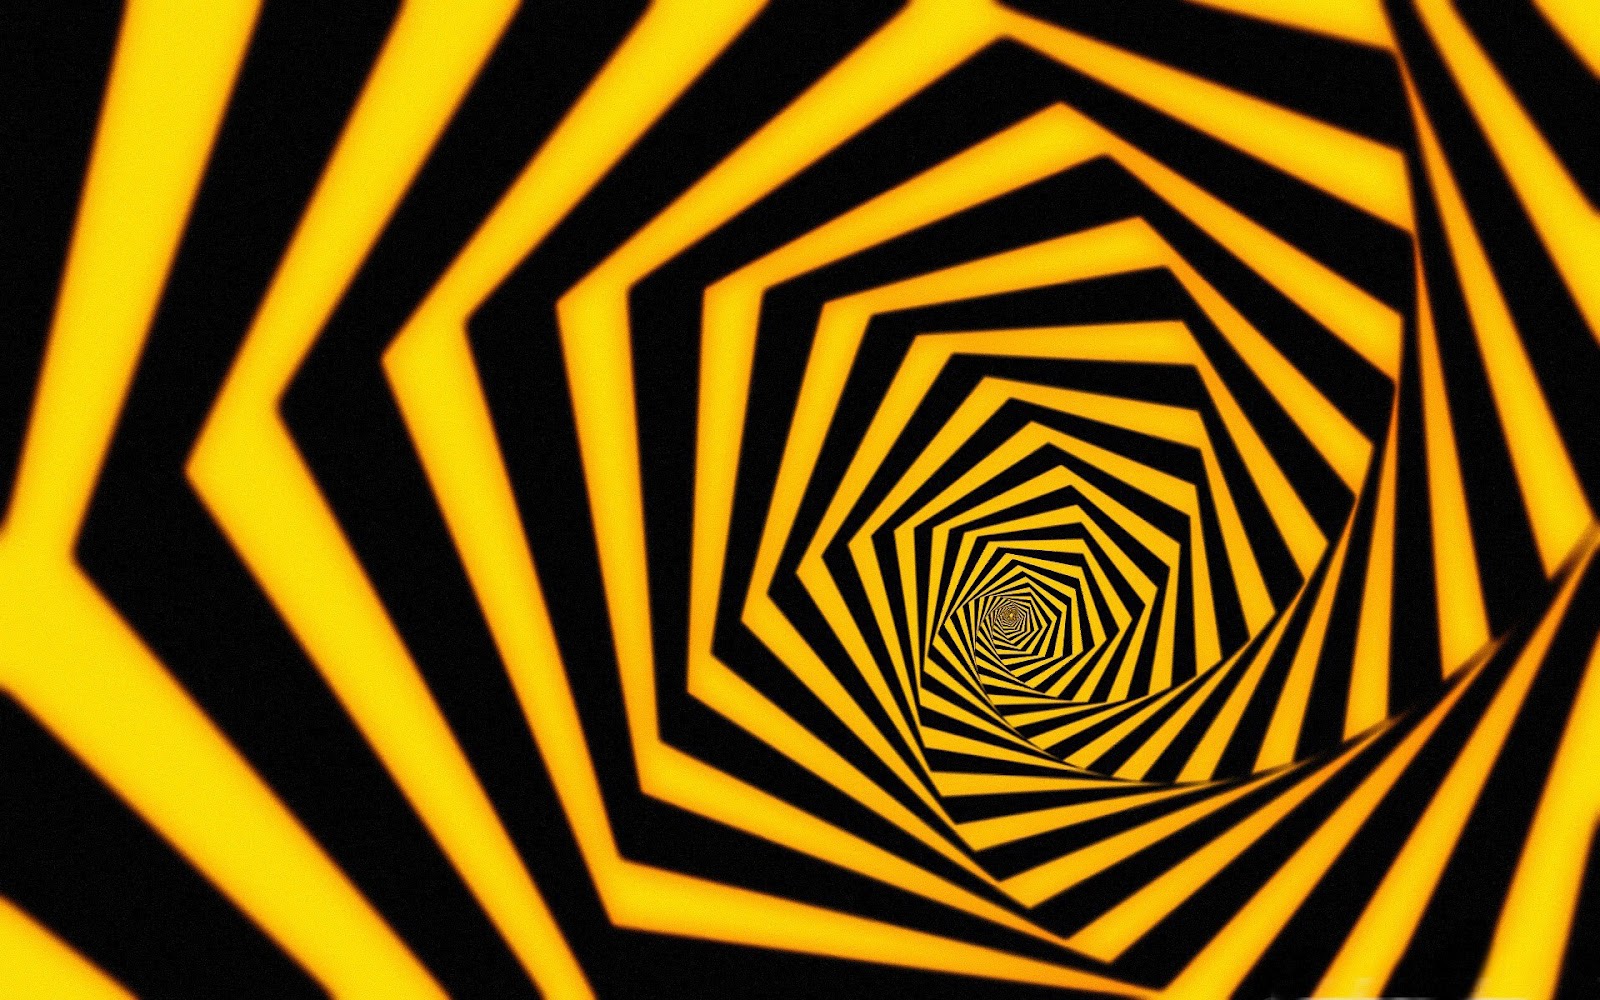 Wallpaper With An Optical Illusion Stare At The Image For